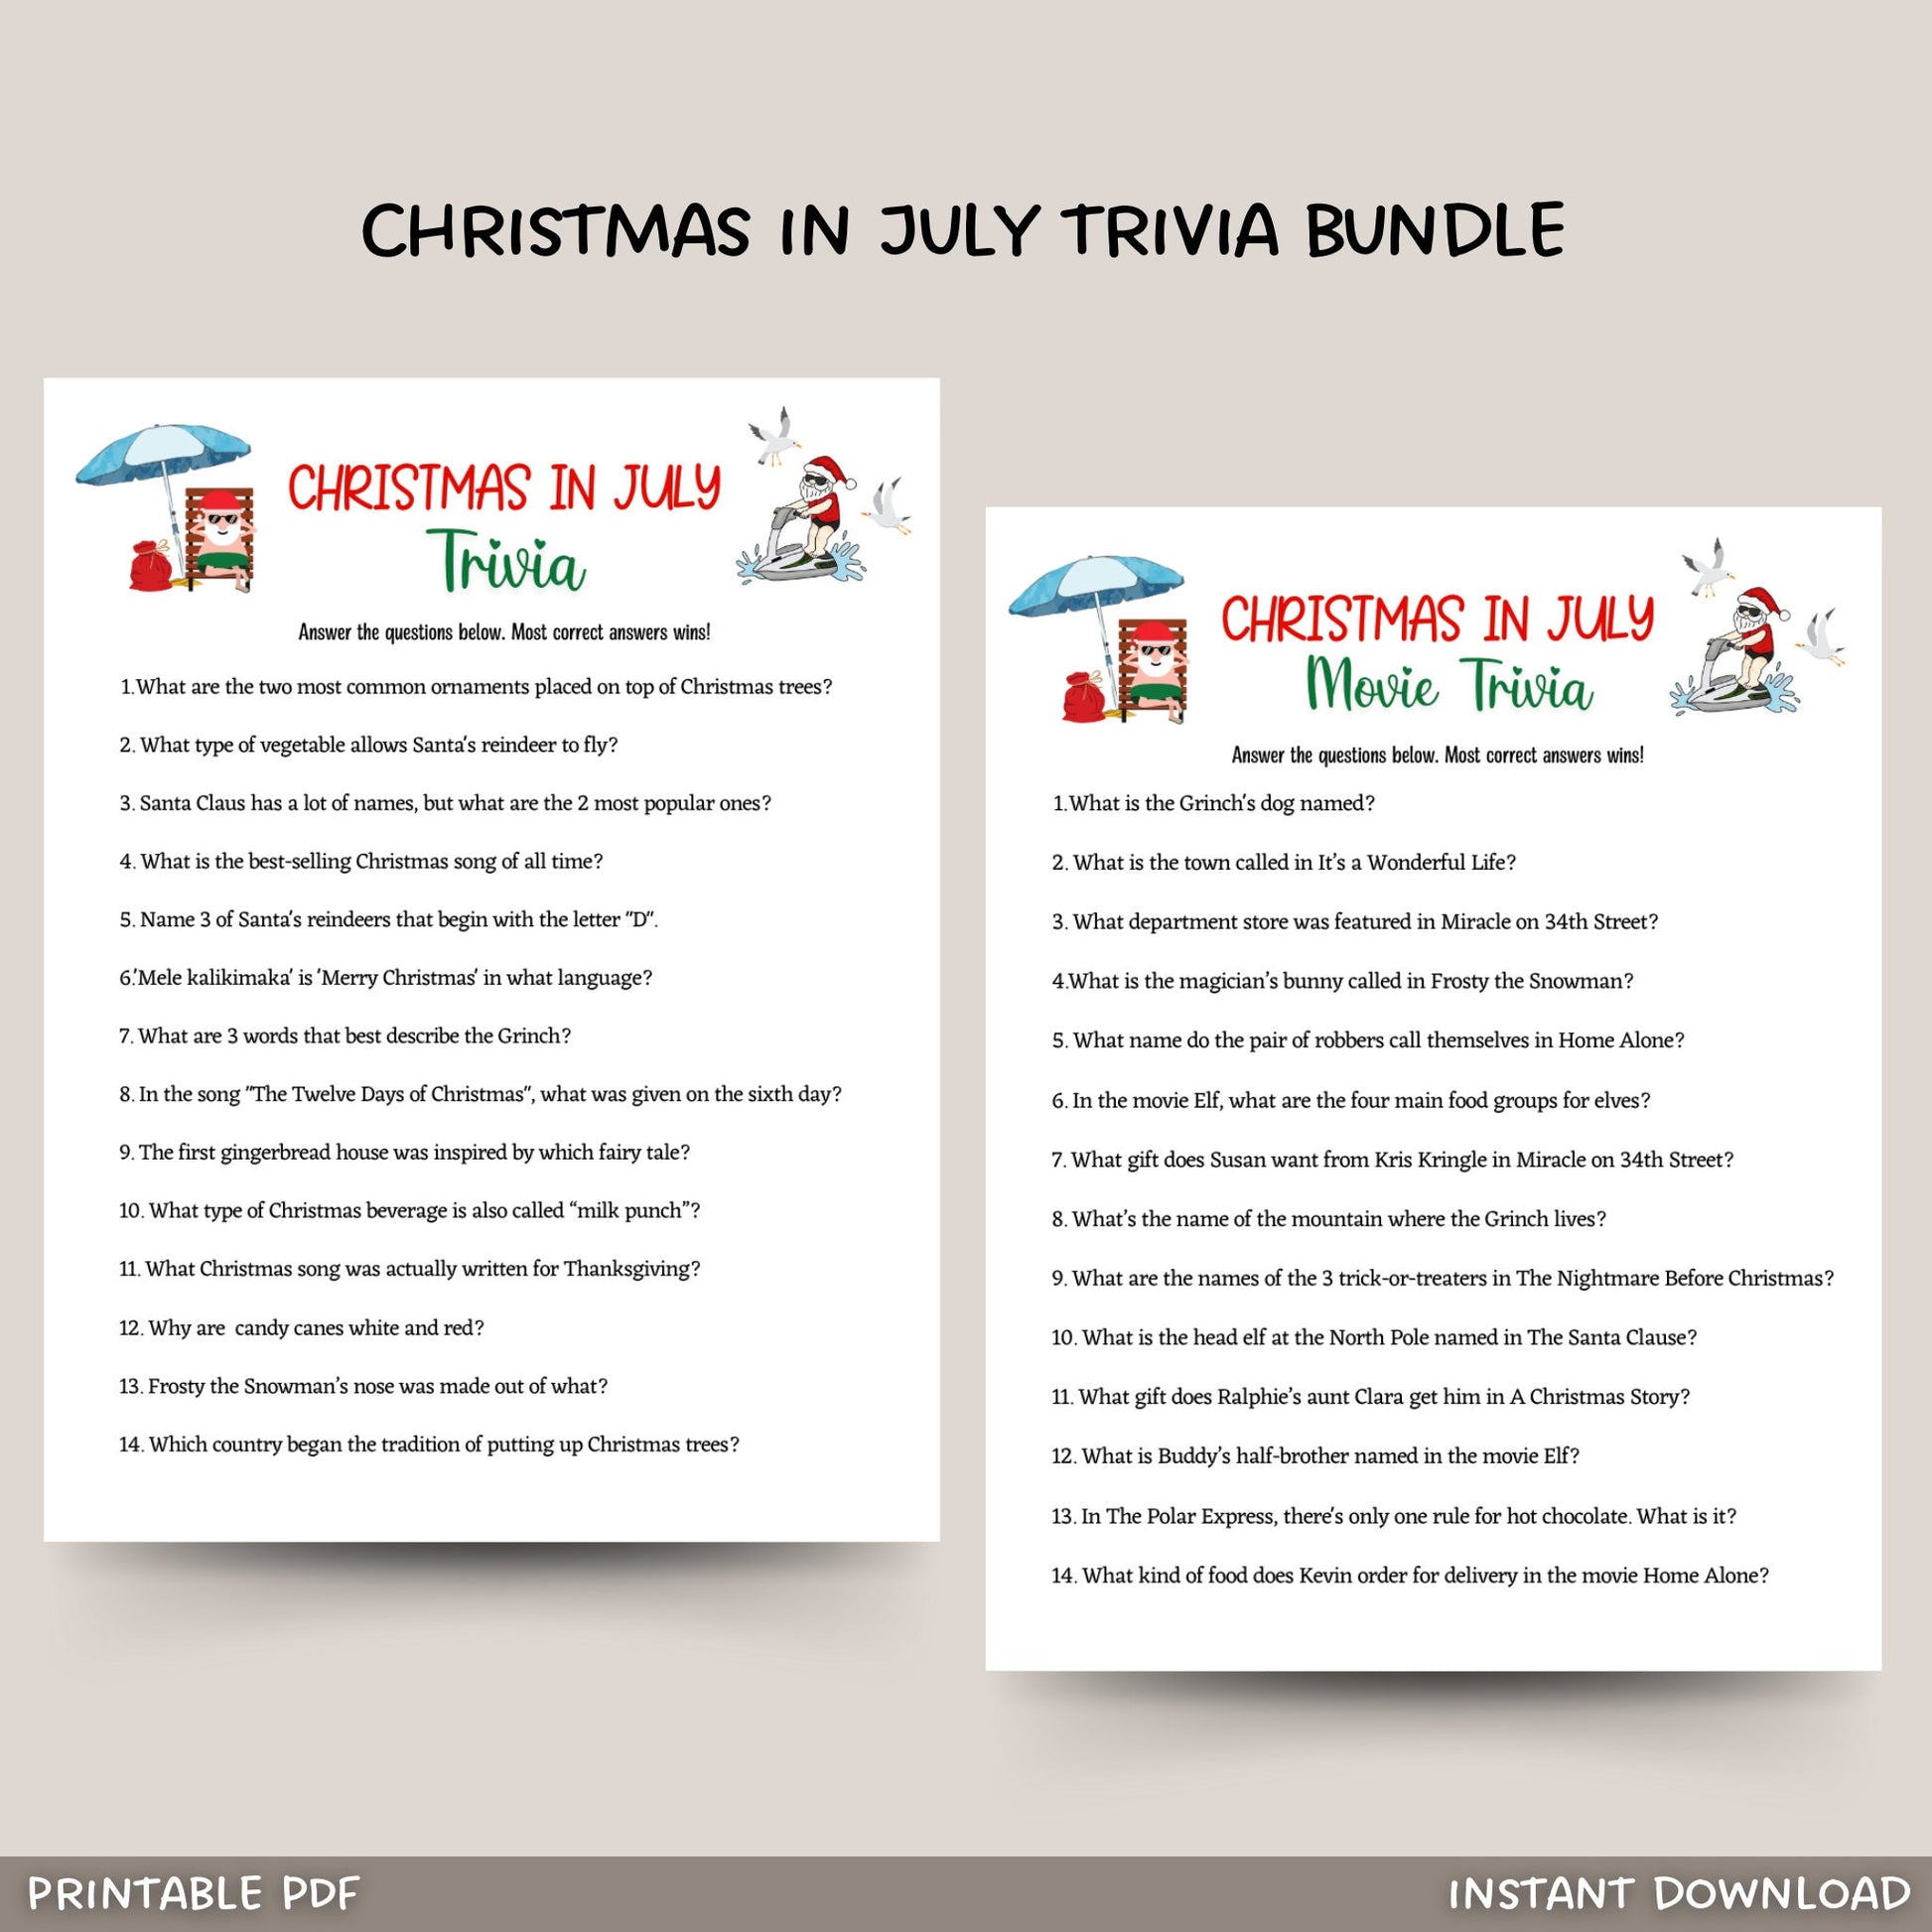 Christmas in July Trivia Game Printable, Summer Christmas Party, Tropical Party Game Kids & Adults, Fun Family Activity, Office Party Ideas